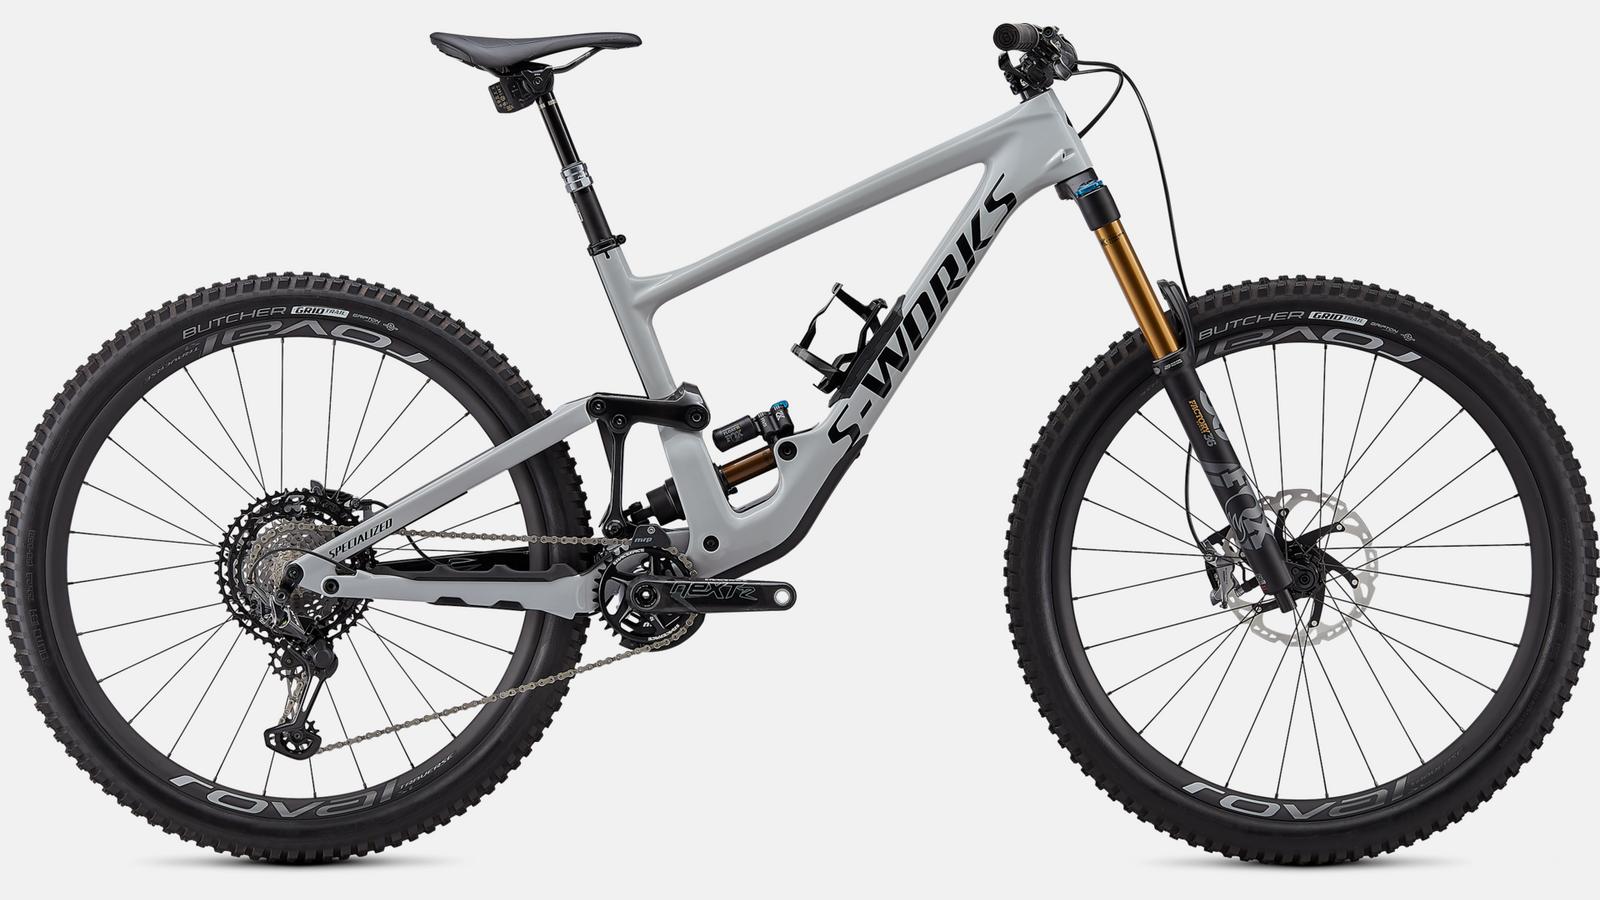 Paint for 2020 Specialized S-Works Enduro - Gloss Dove Grey